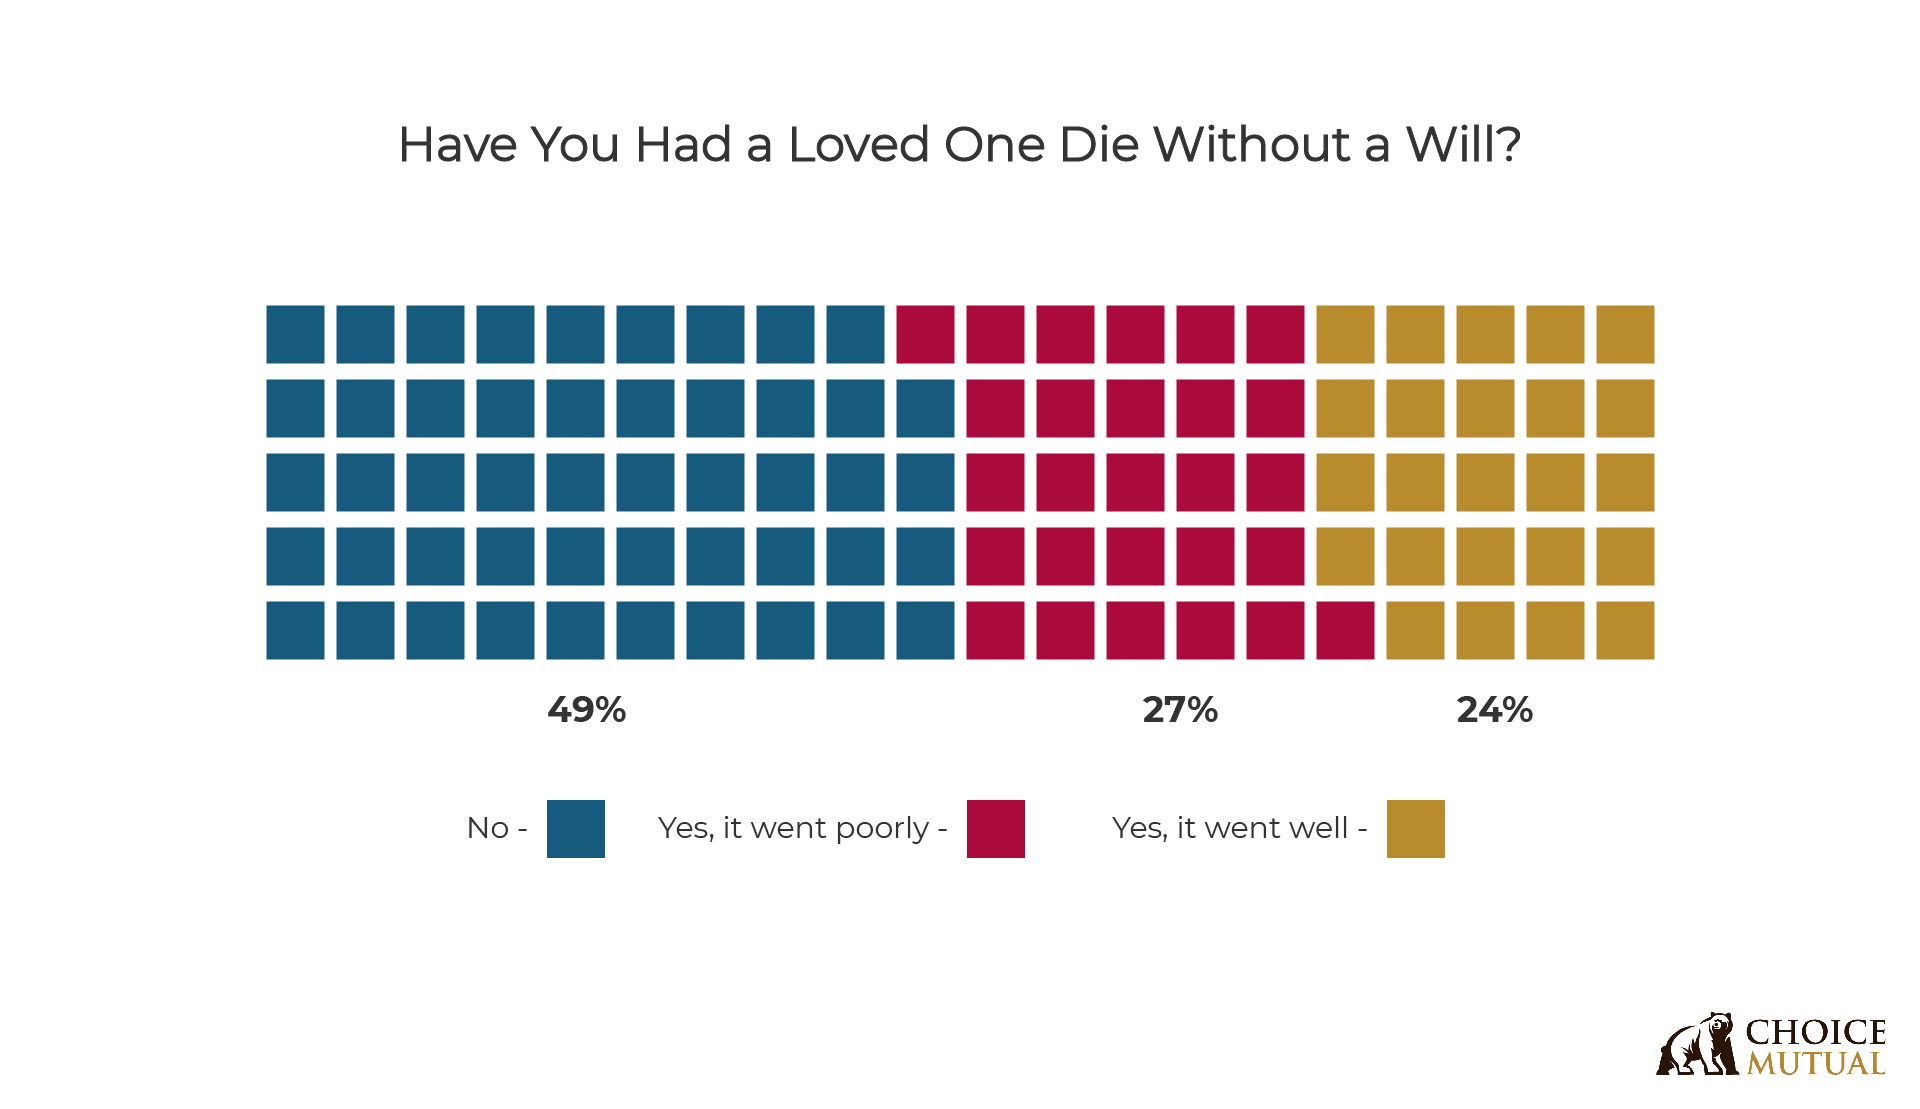 A chart showing how many people had a loved one die without having a will.